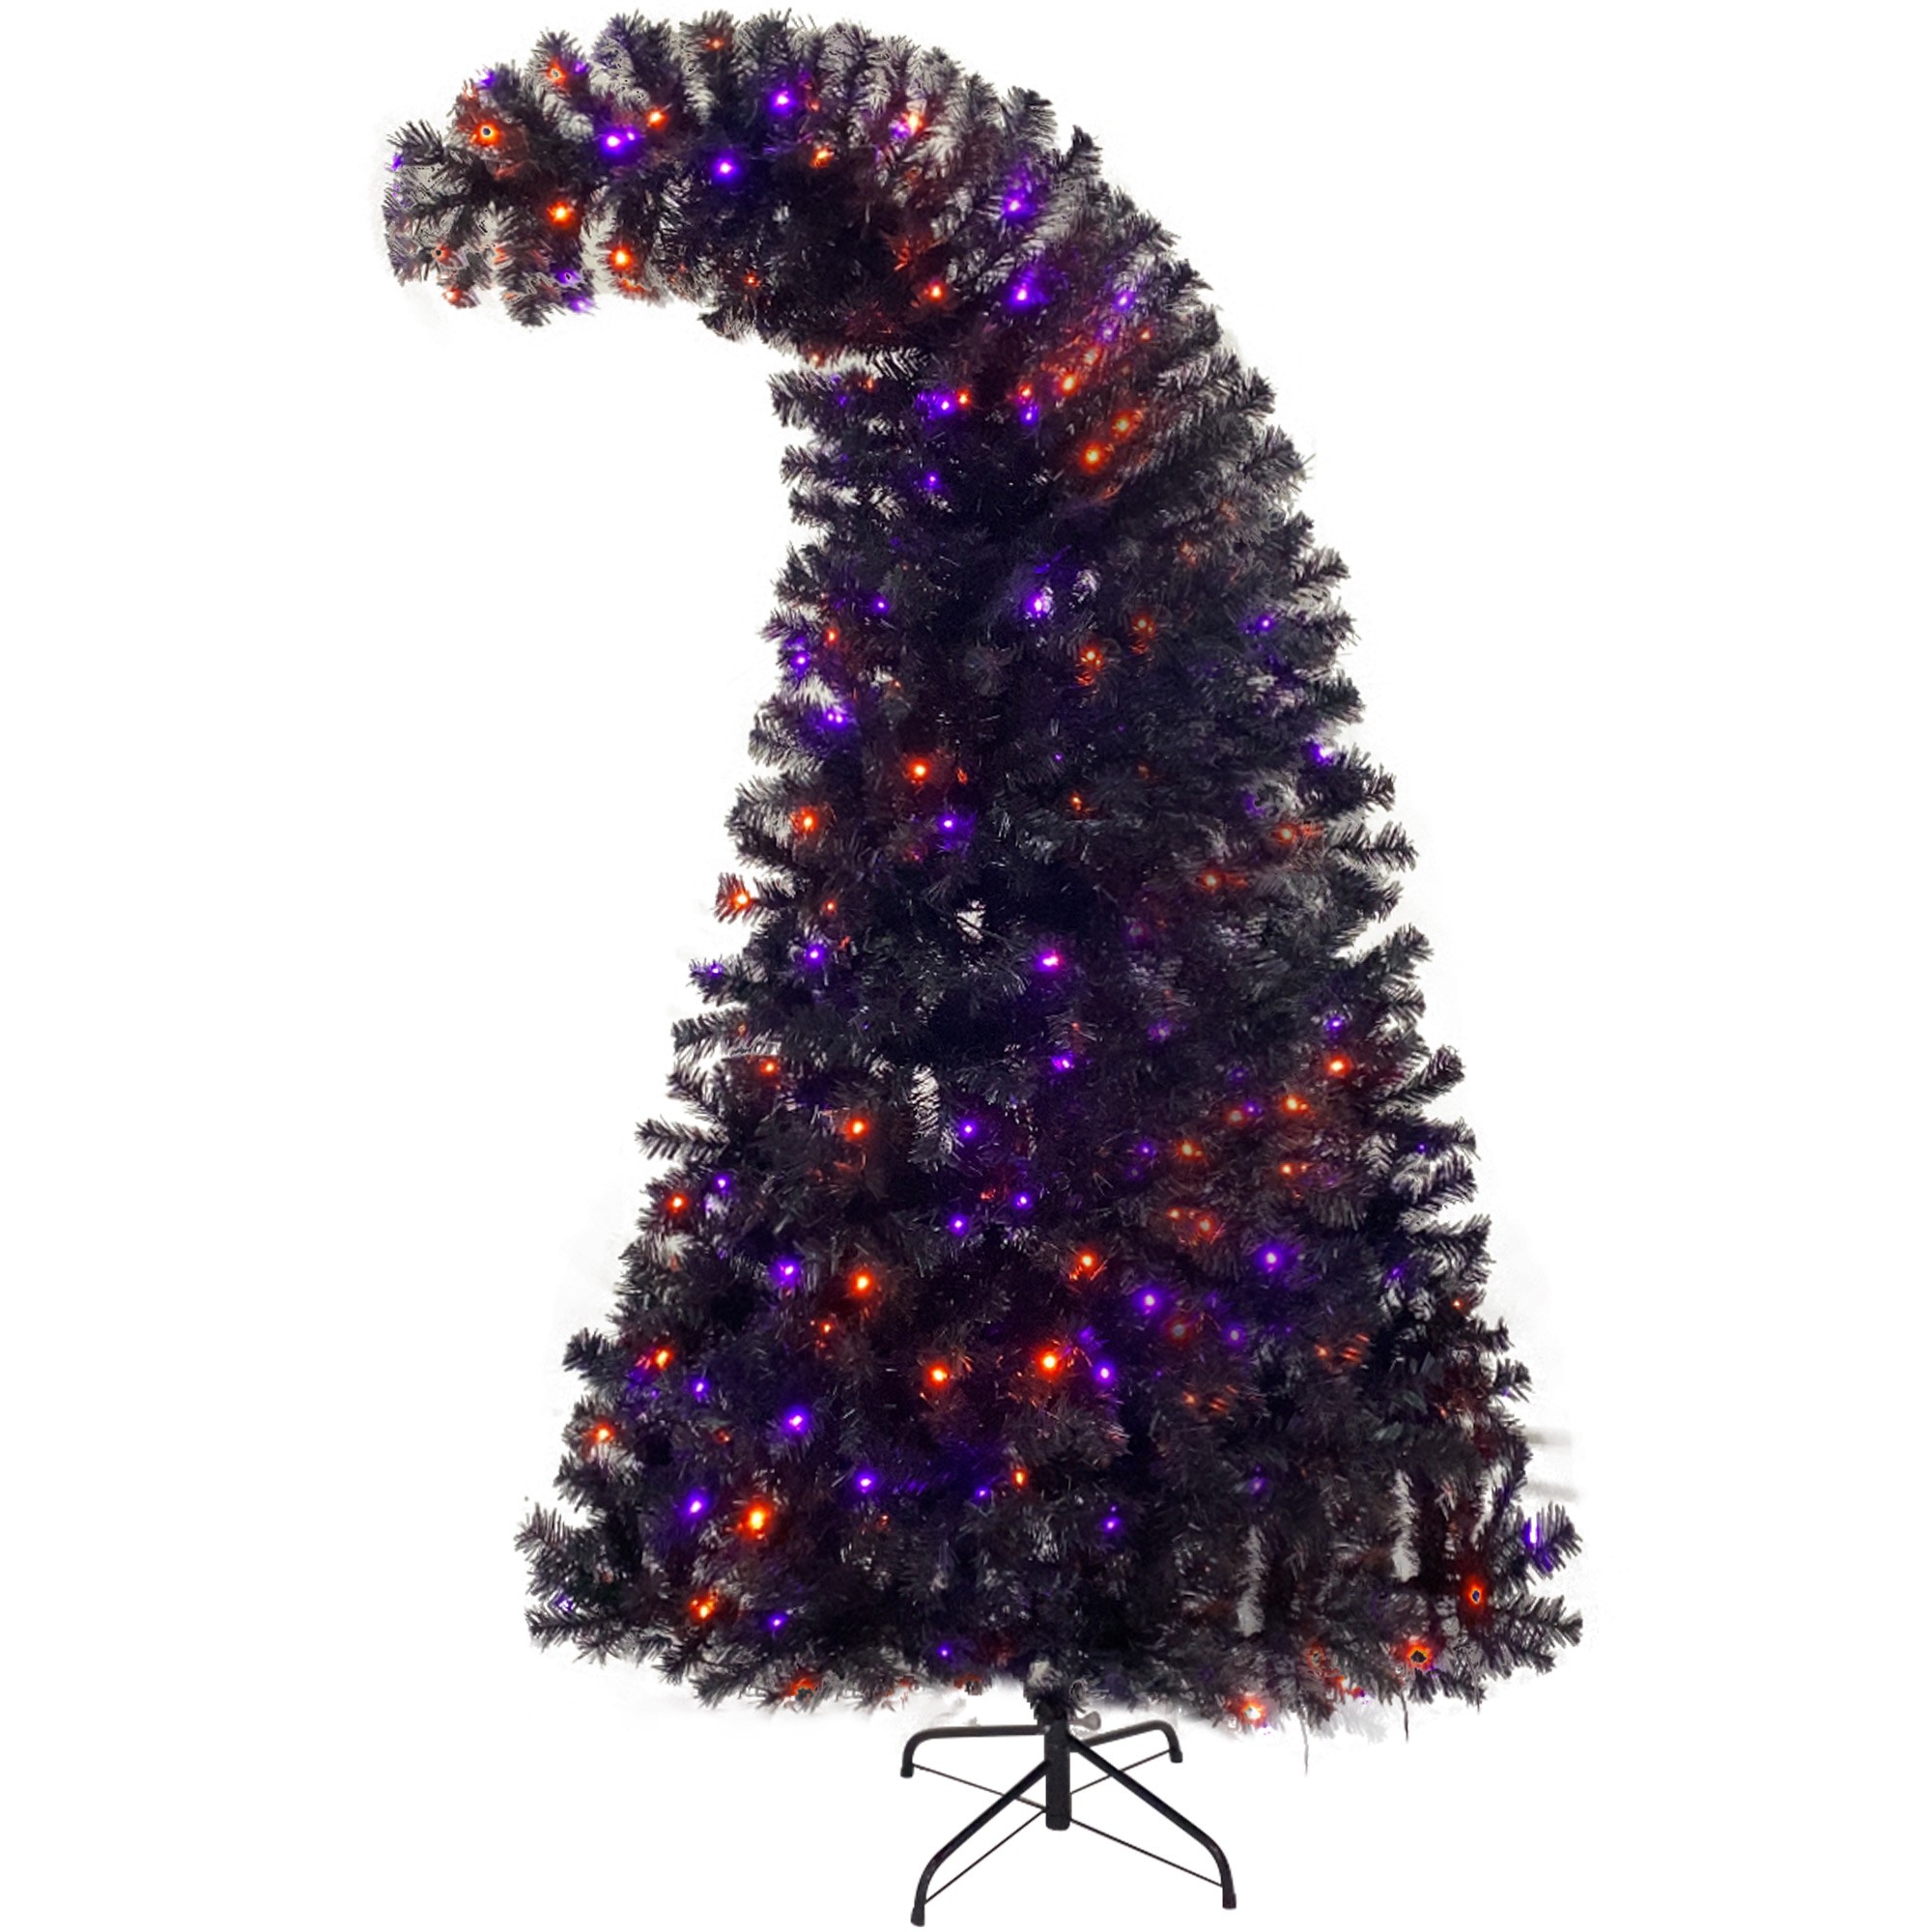 6FT Hinged Fraser Fir Artificial Fir Bent Top Christmas Tree, Bendable Grinch Style Christmas Tree Holiday Decoration w/1,080 Lush Branch Tips, 250 LED Lights